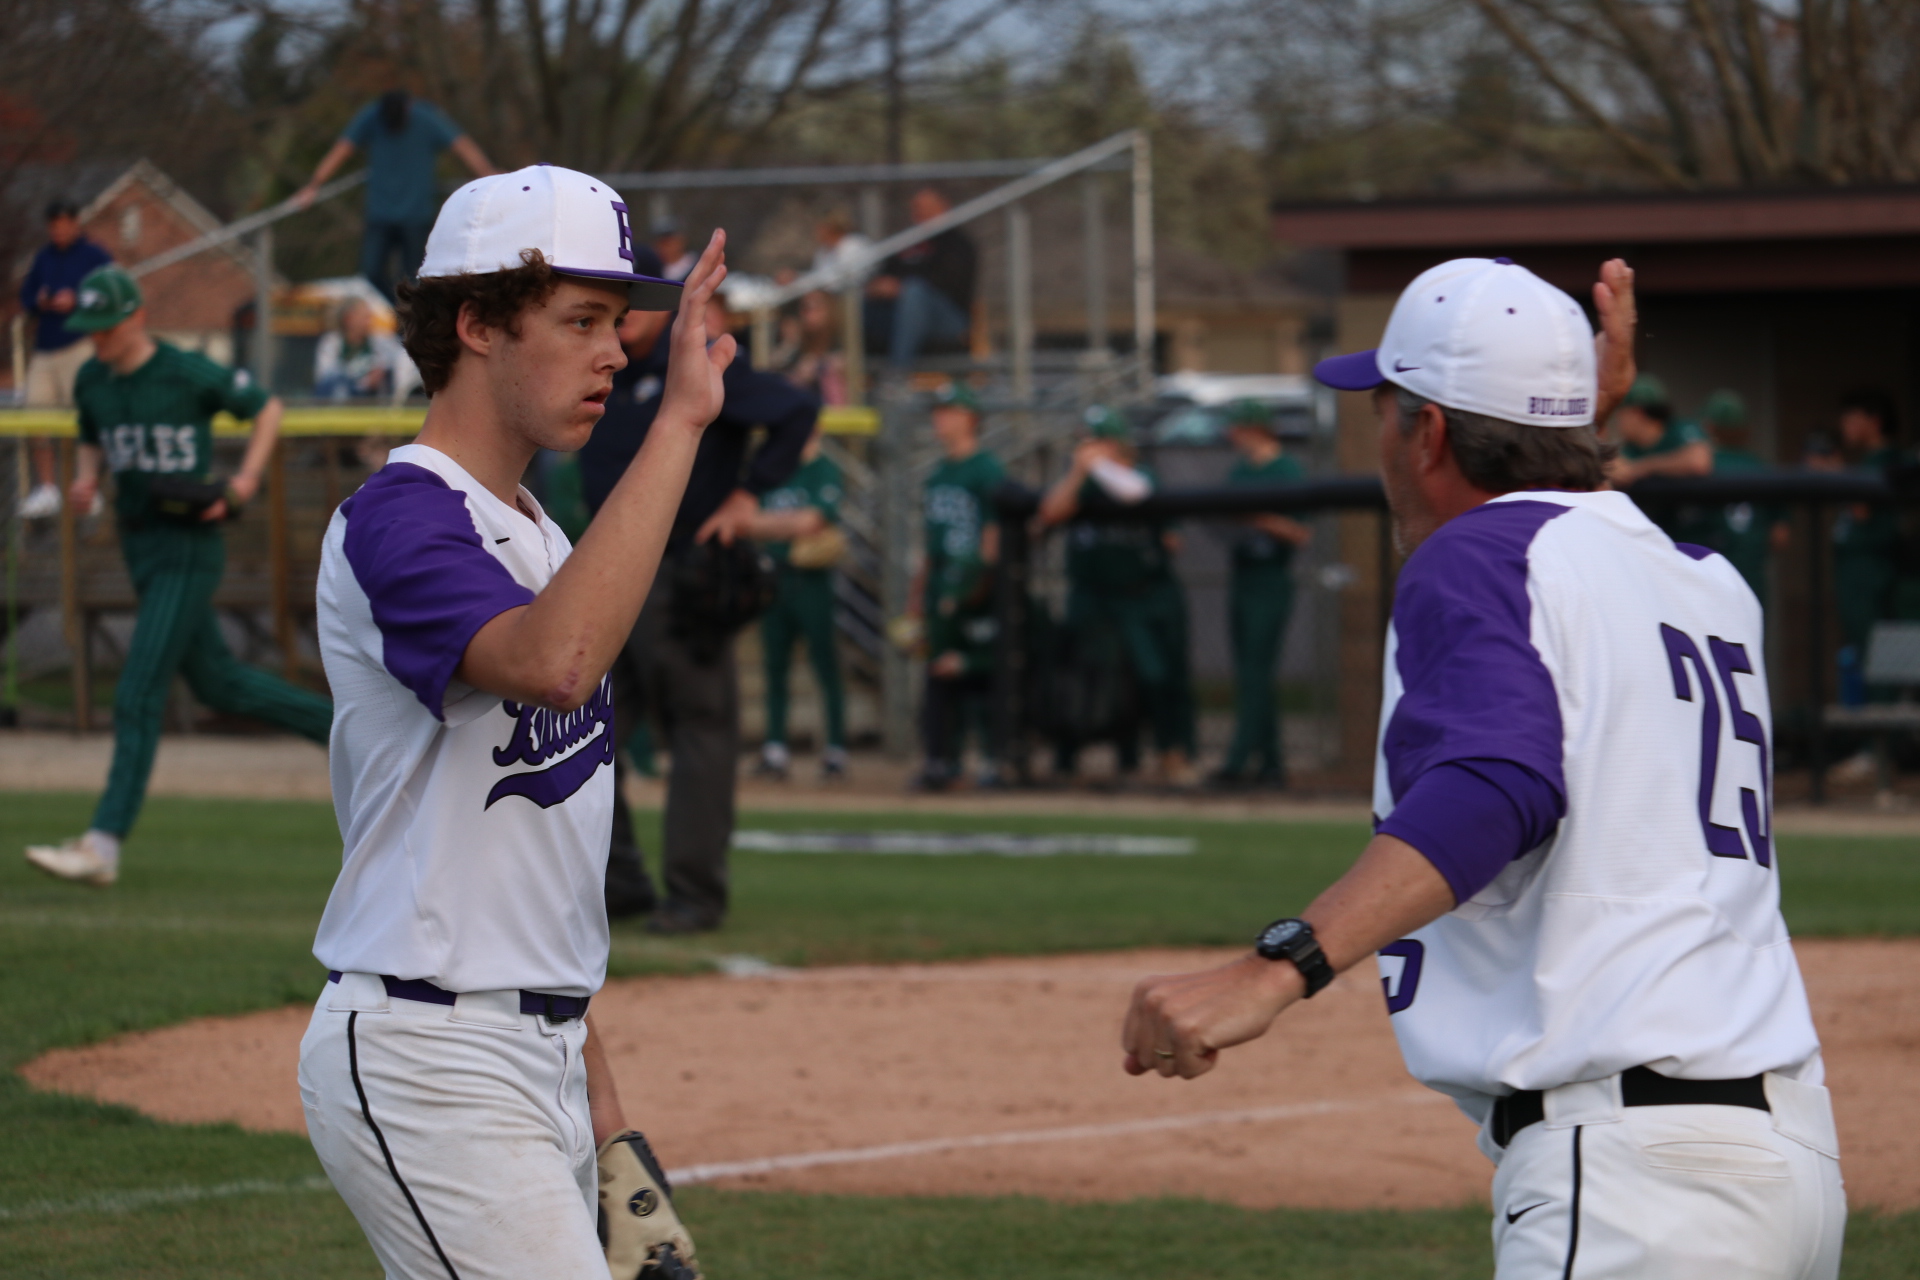 Baseball Completes the Sweep vs. Zionsville Under the Friday Night Lights, 5-2